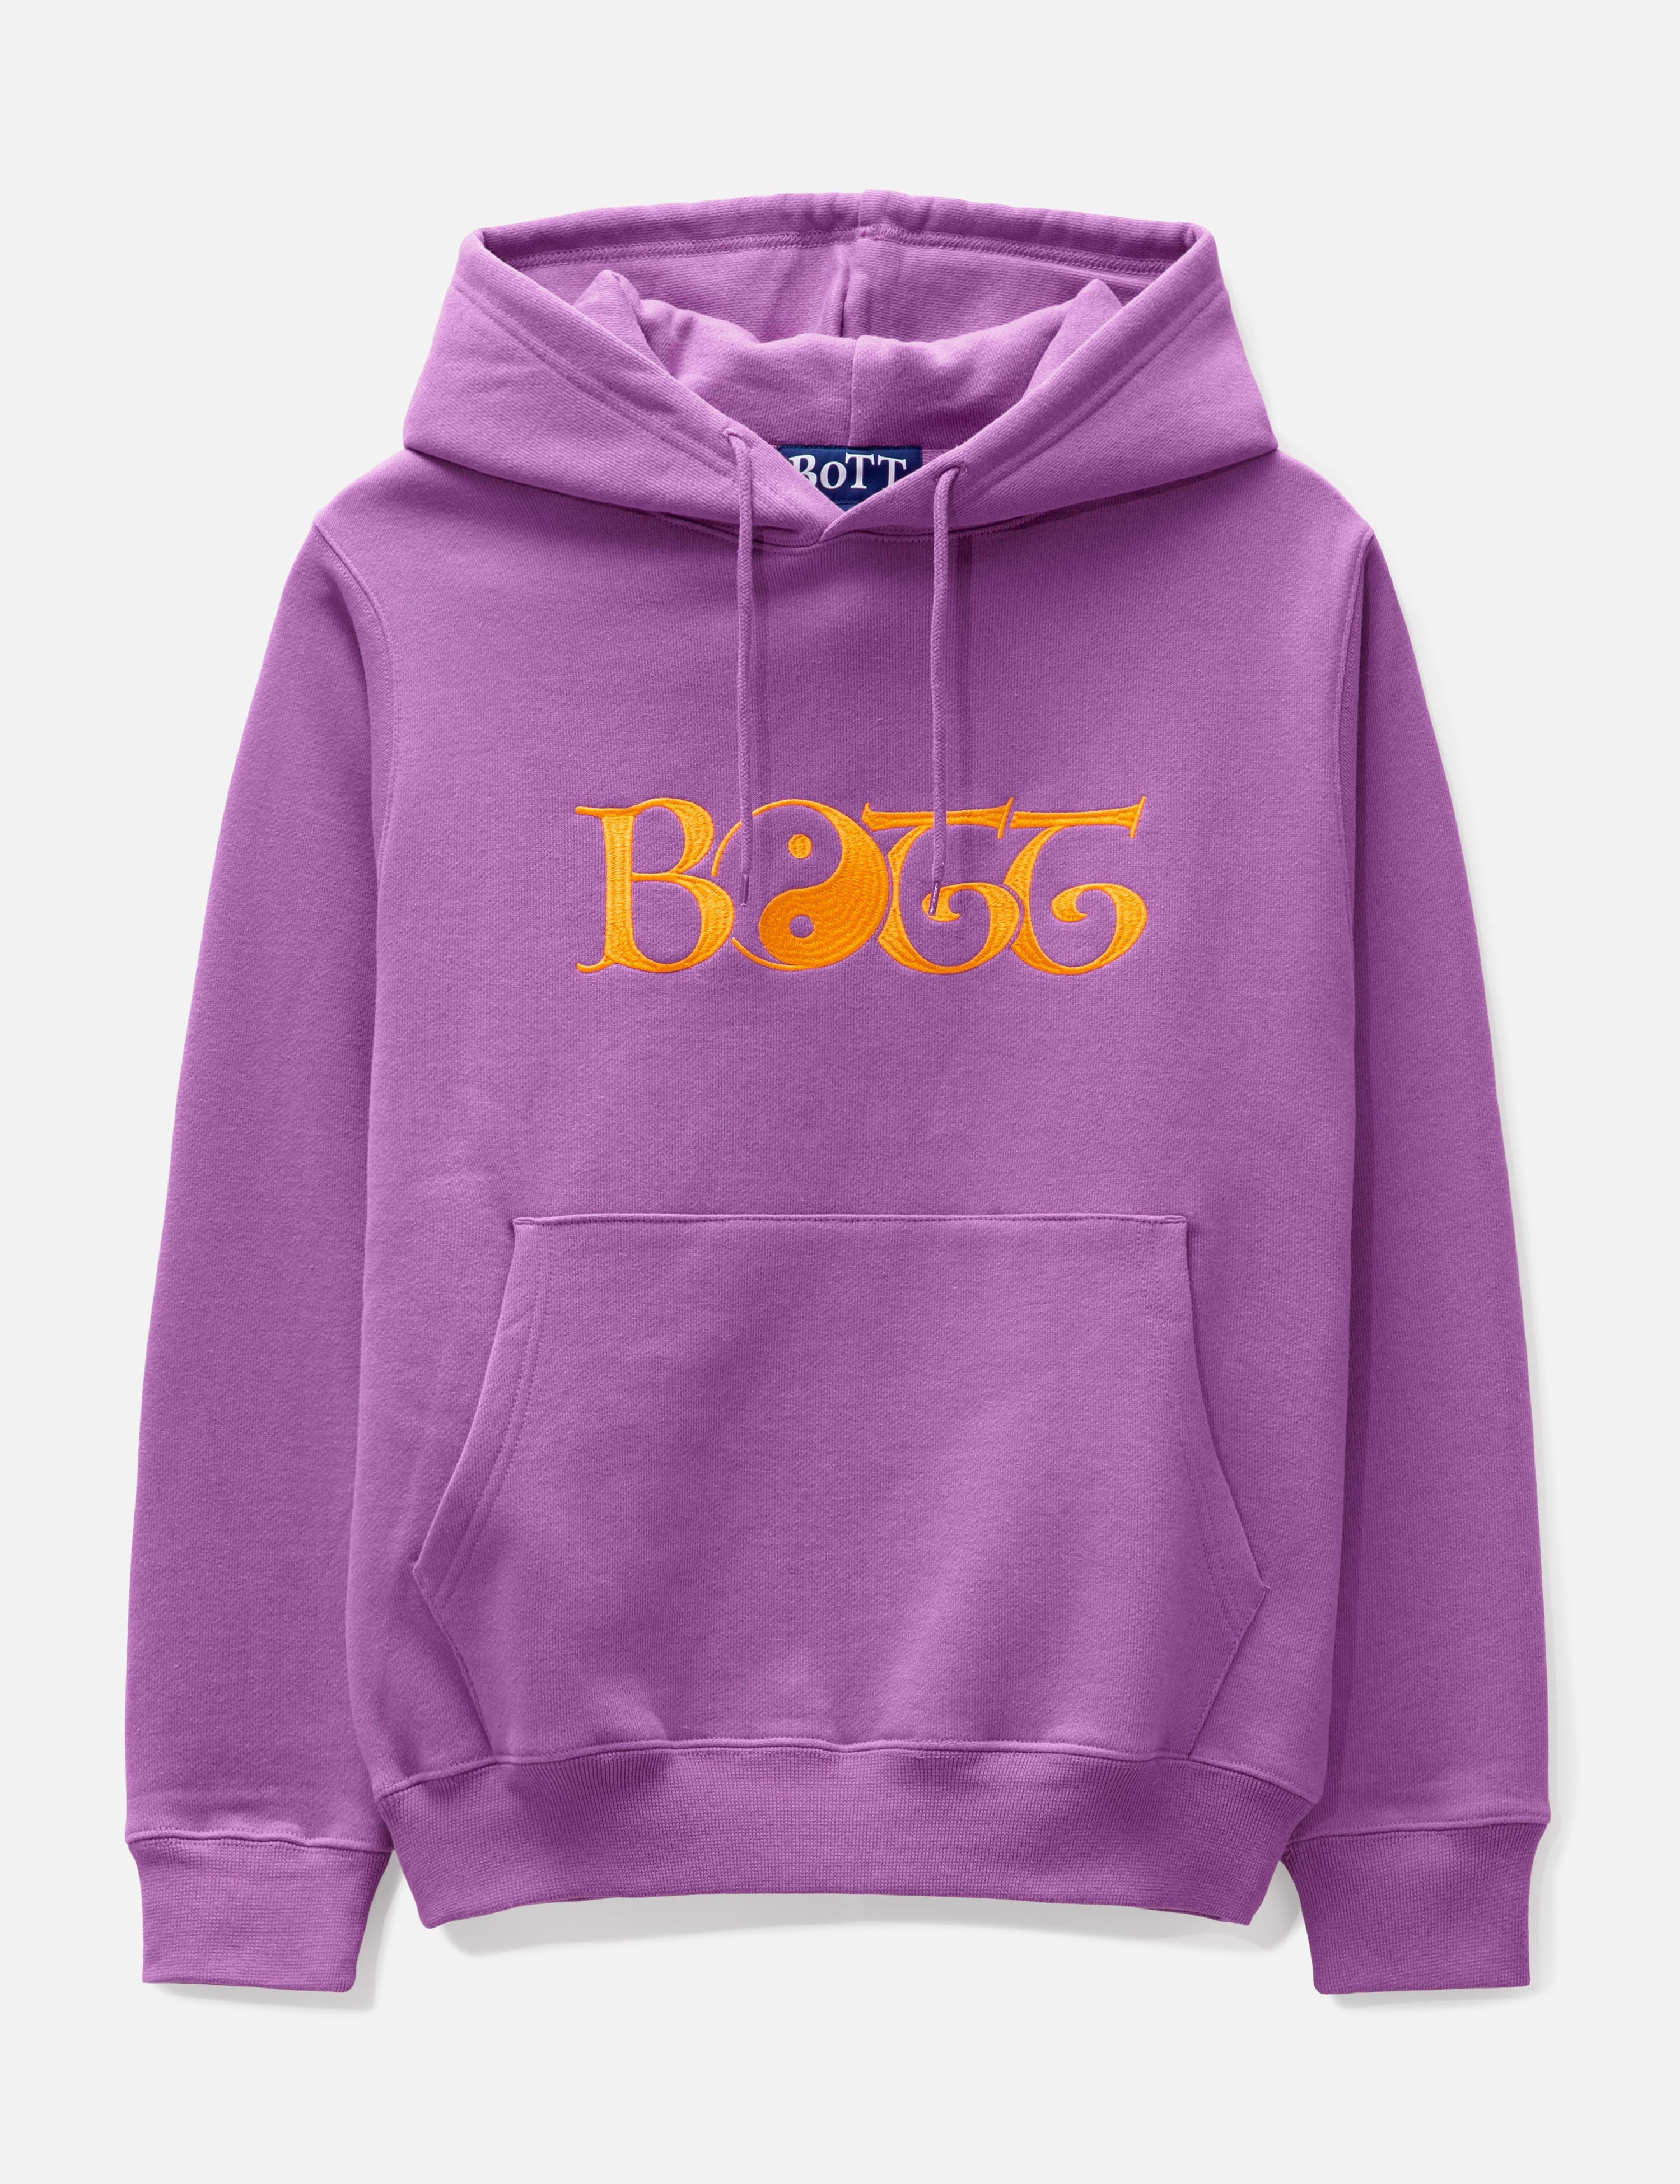 BoTT - 2Y Hoodie | HBX - Globally Curated Fashion and Lifestyle by